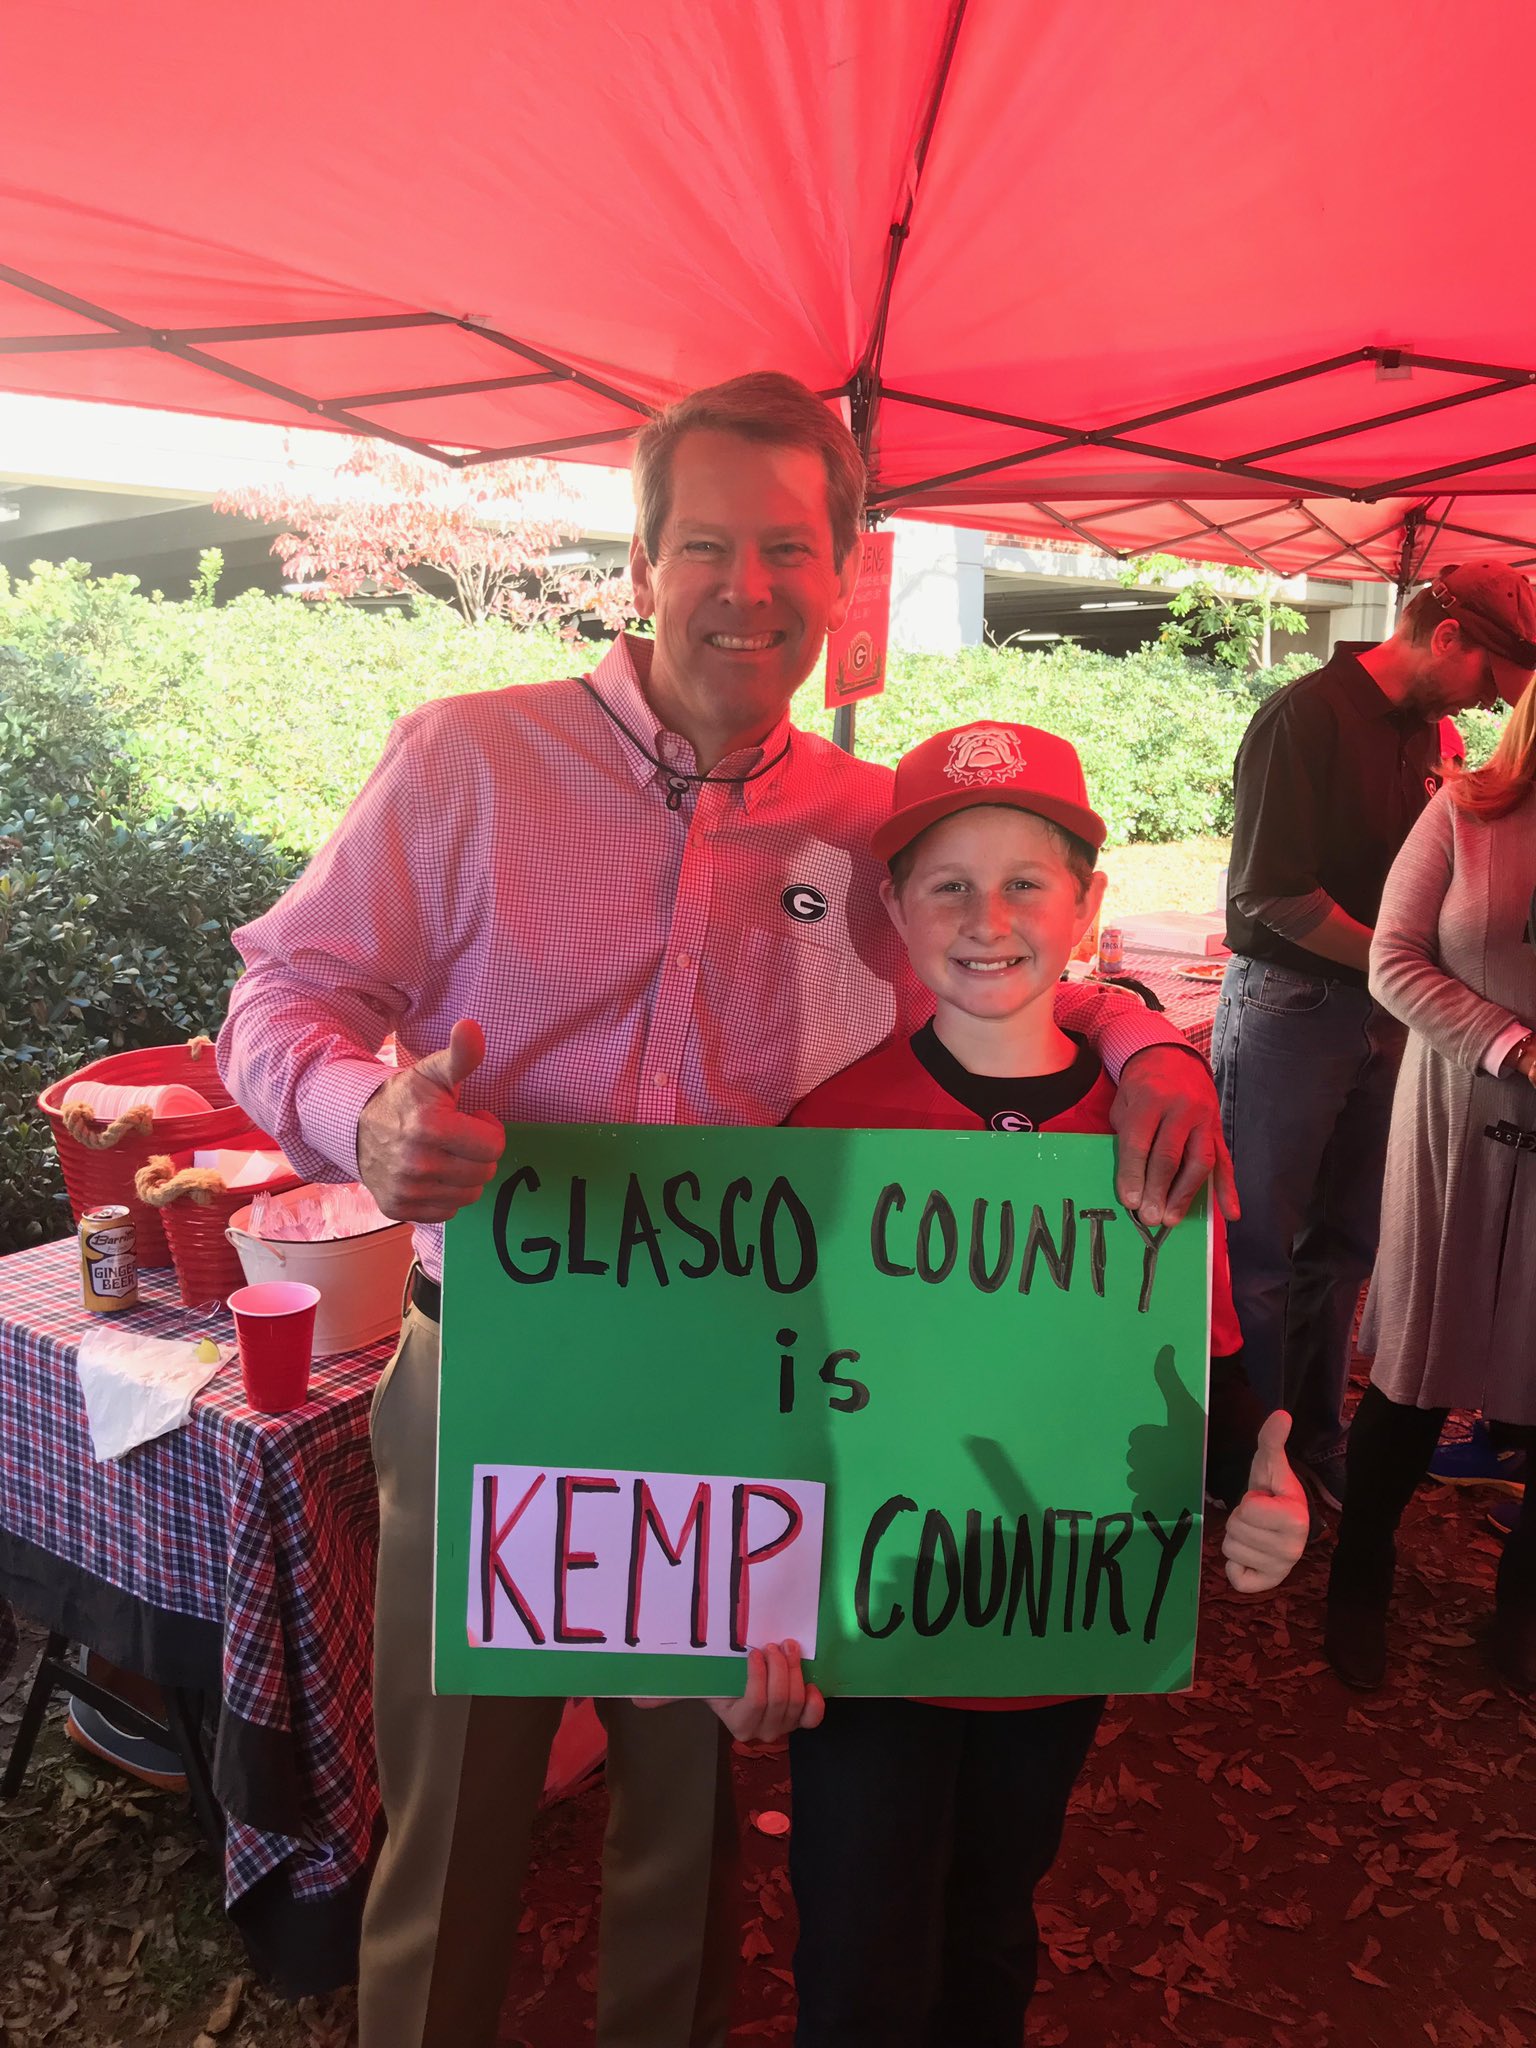 brian-kemp-on-twitter-great-sign-gapol